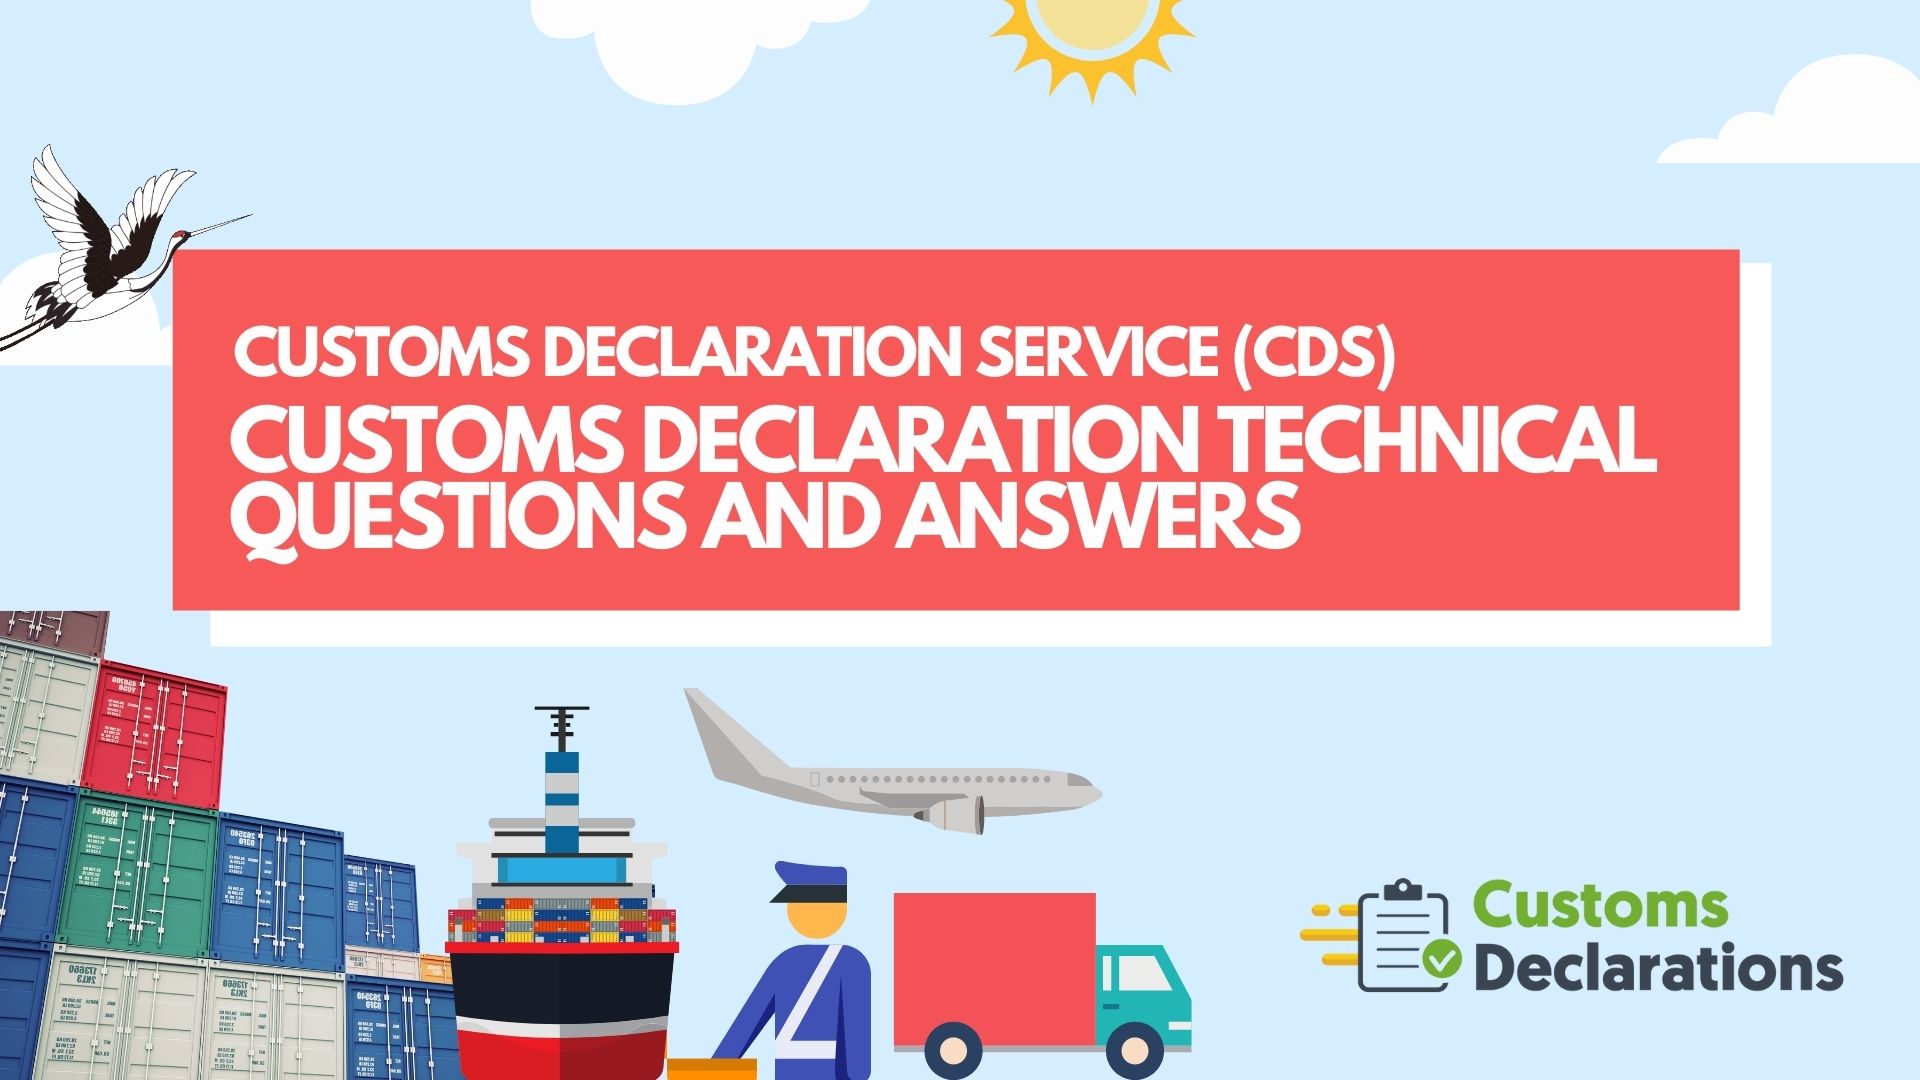 Customs Declaration Systems (CDS) - Customs Declaration Technical Questions and Answers